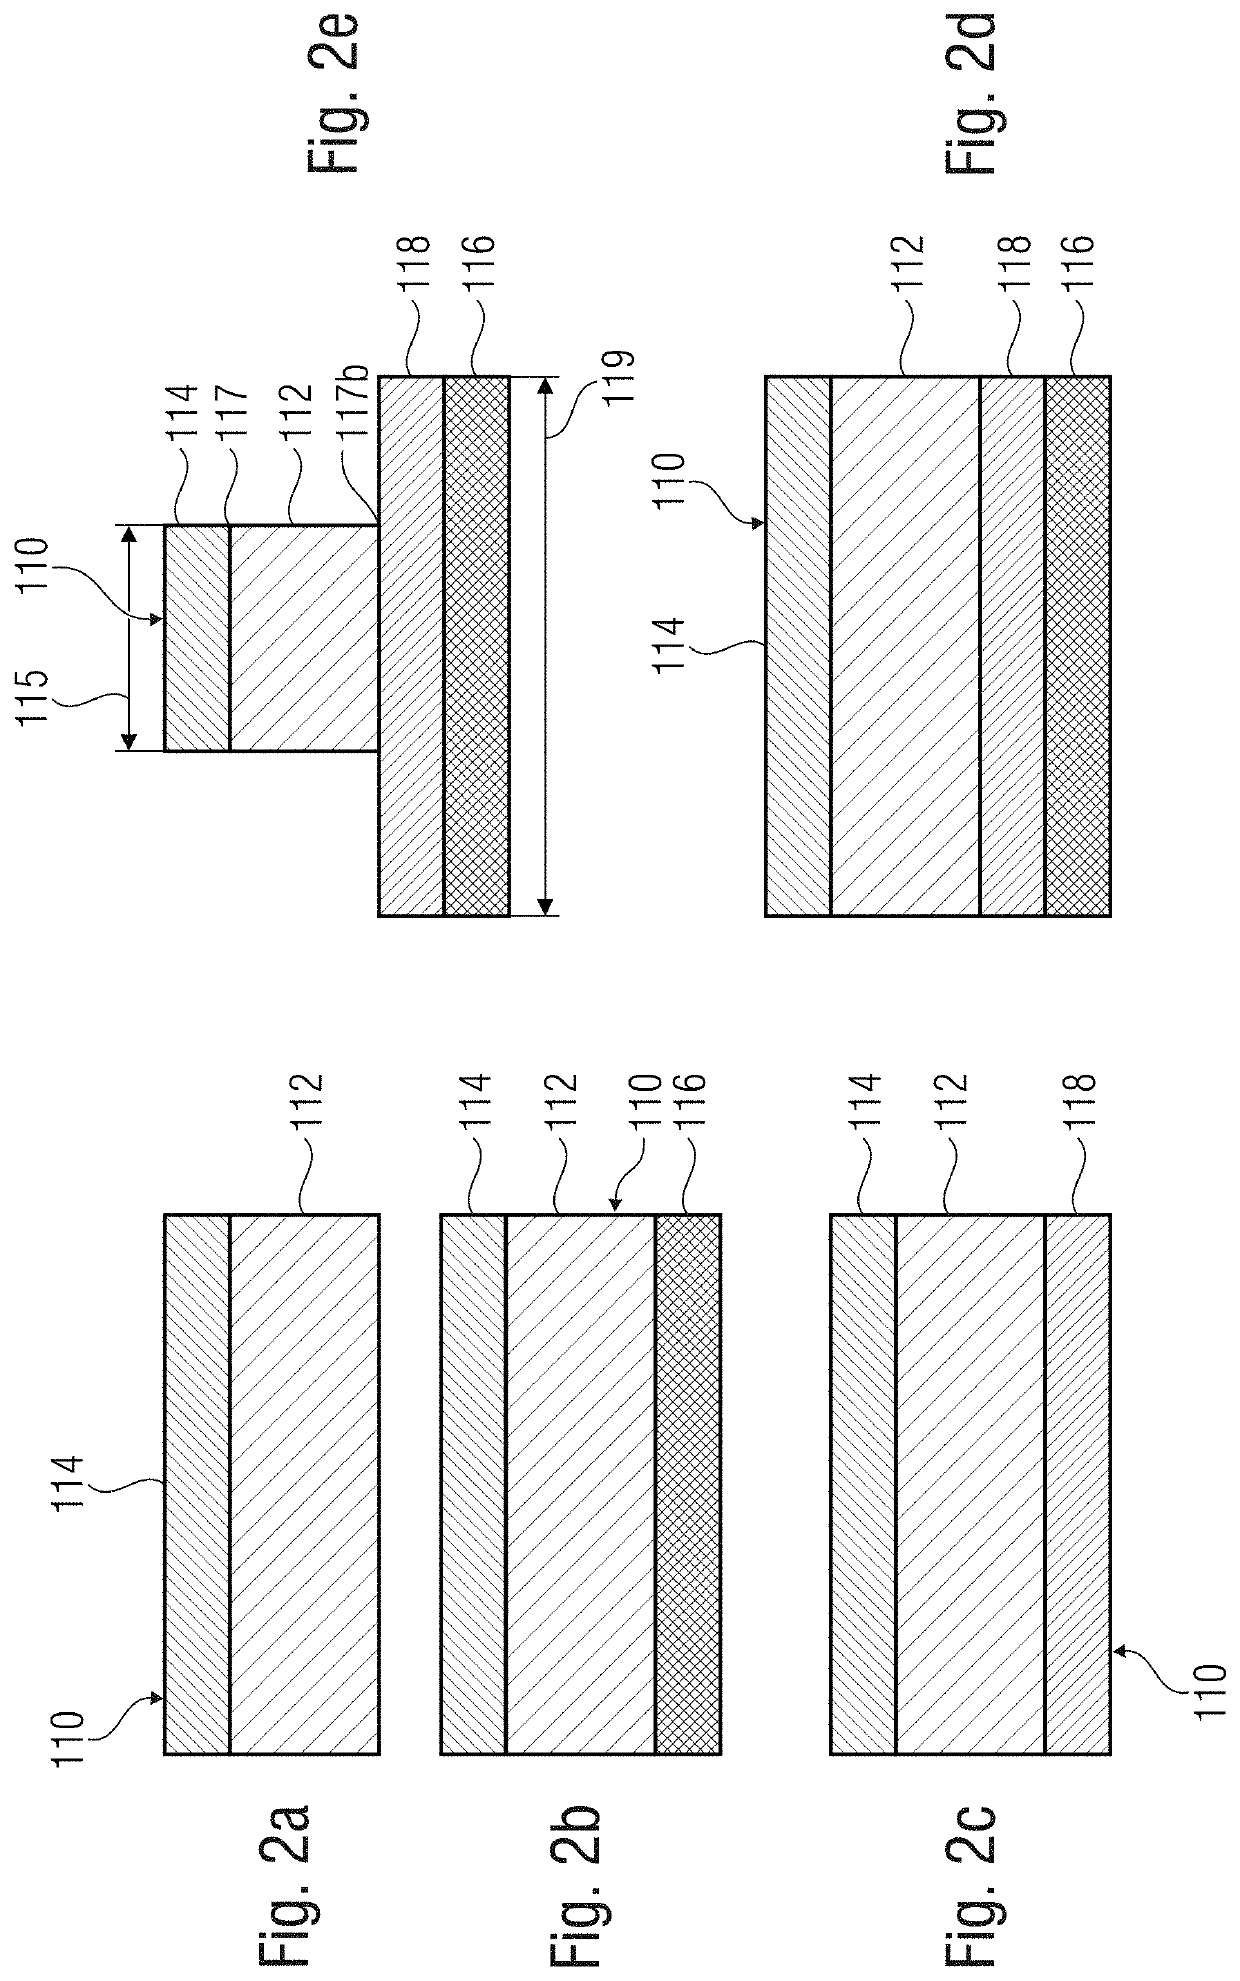 Ferroelectric semiconductor device and method for producing a memory cell